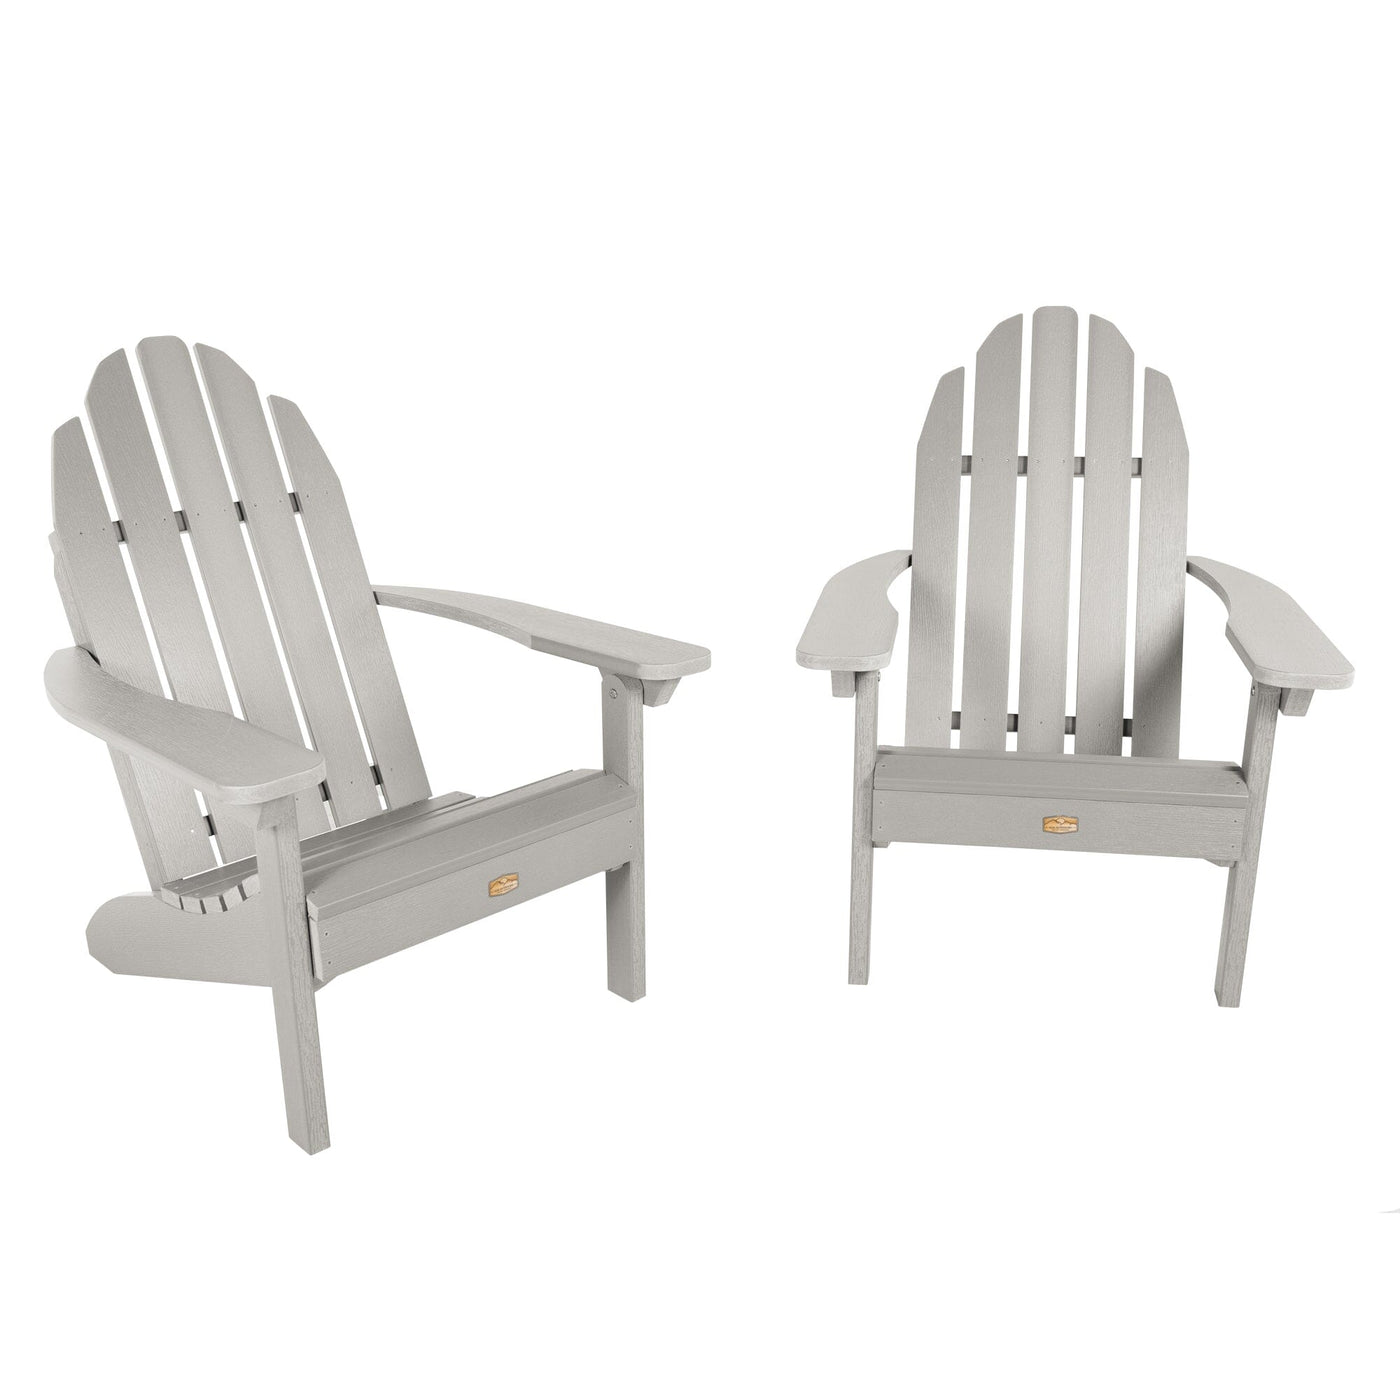 Set of 2 Essential Adirondack Chairs Kitted Sets ELK OUTDOORS® Harbor Gray 